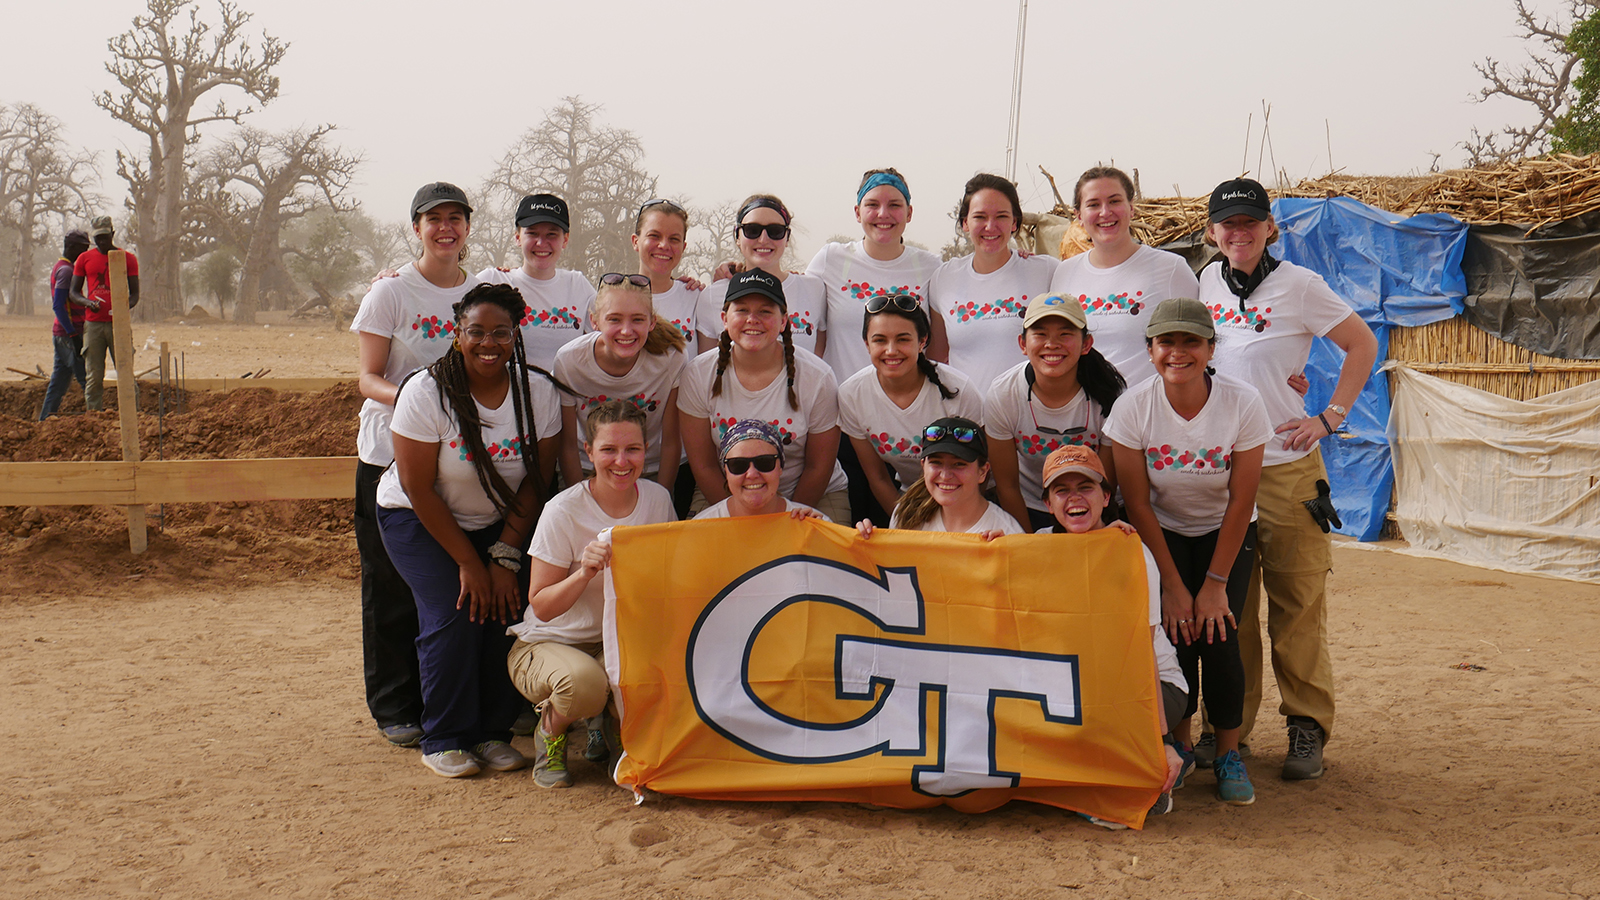 Students from Georgia Tech who traveled to Senegal in Spring 2018